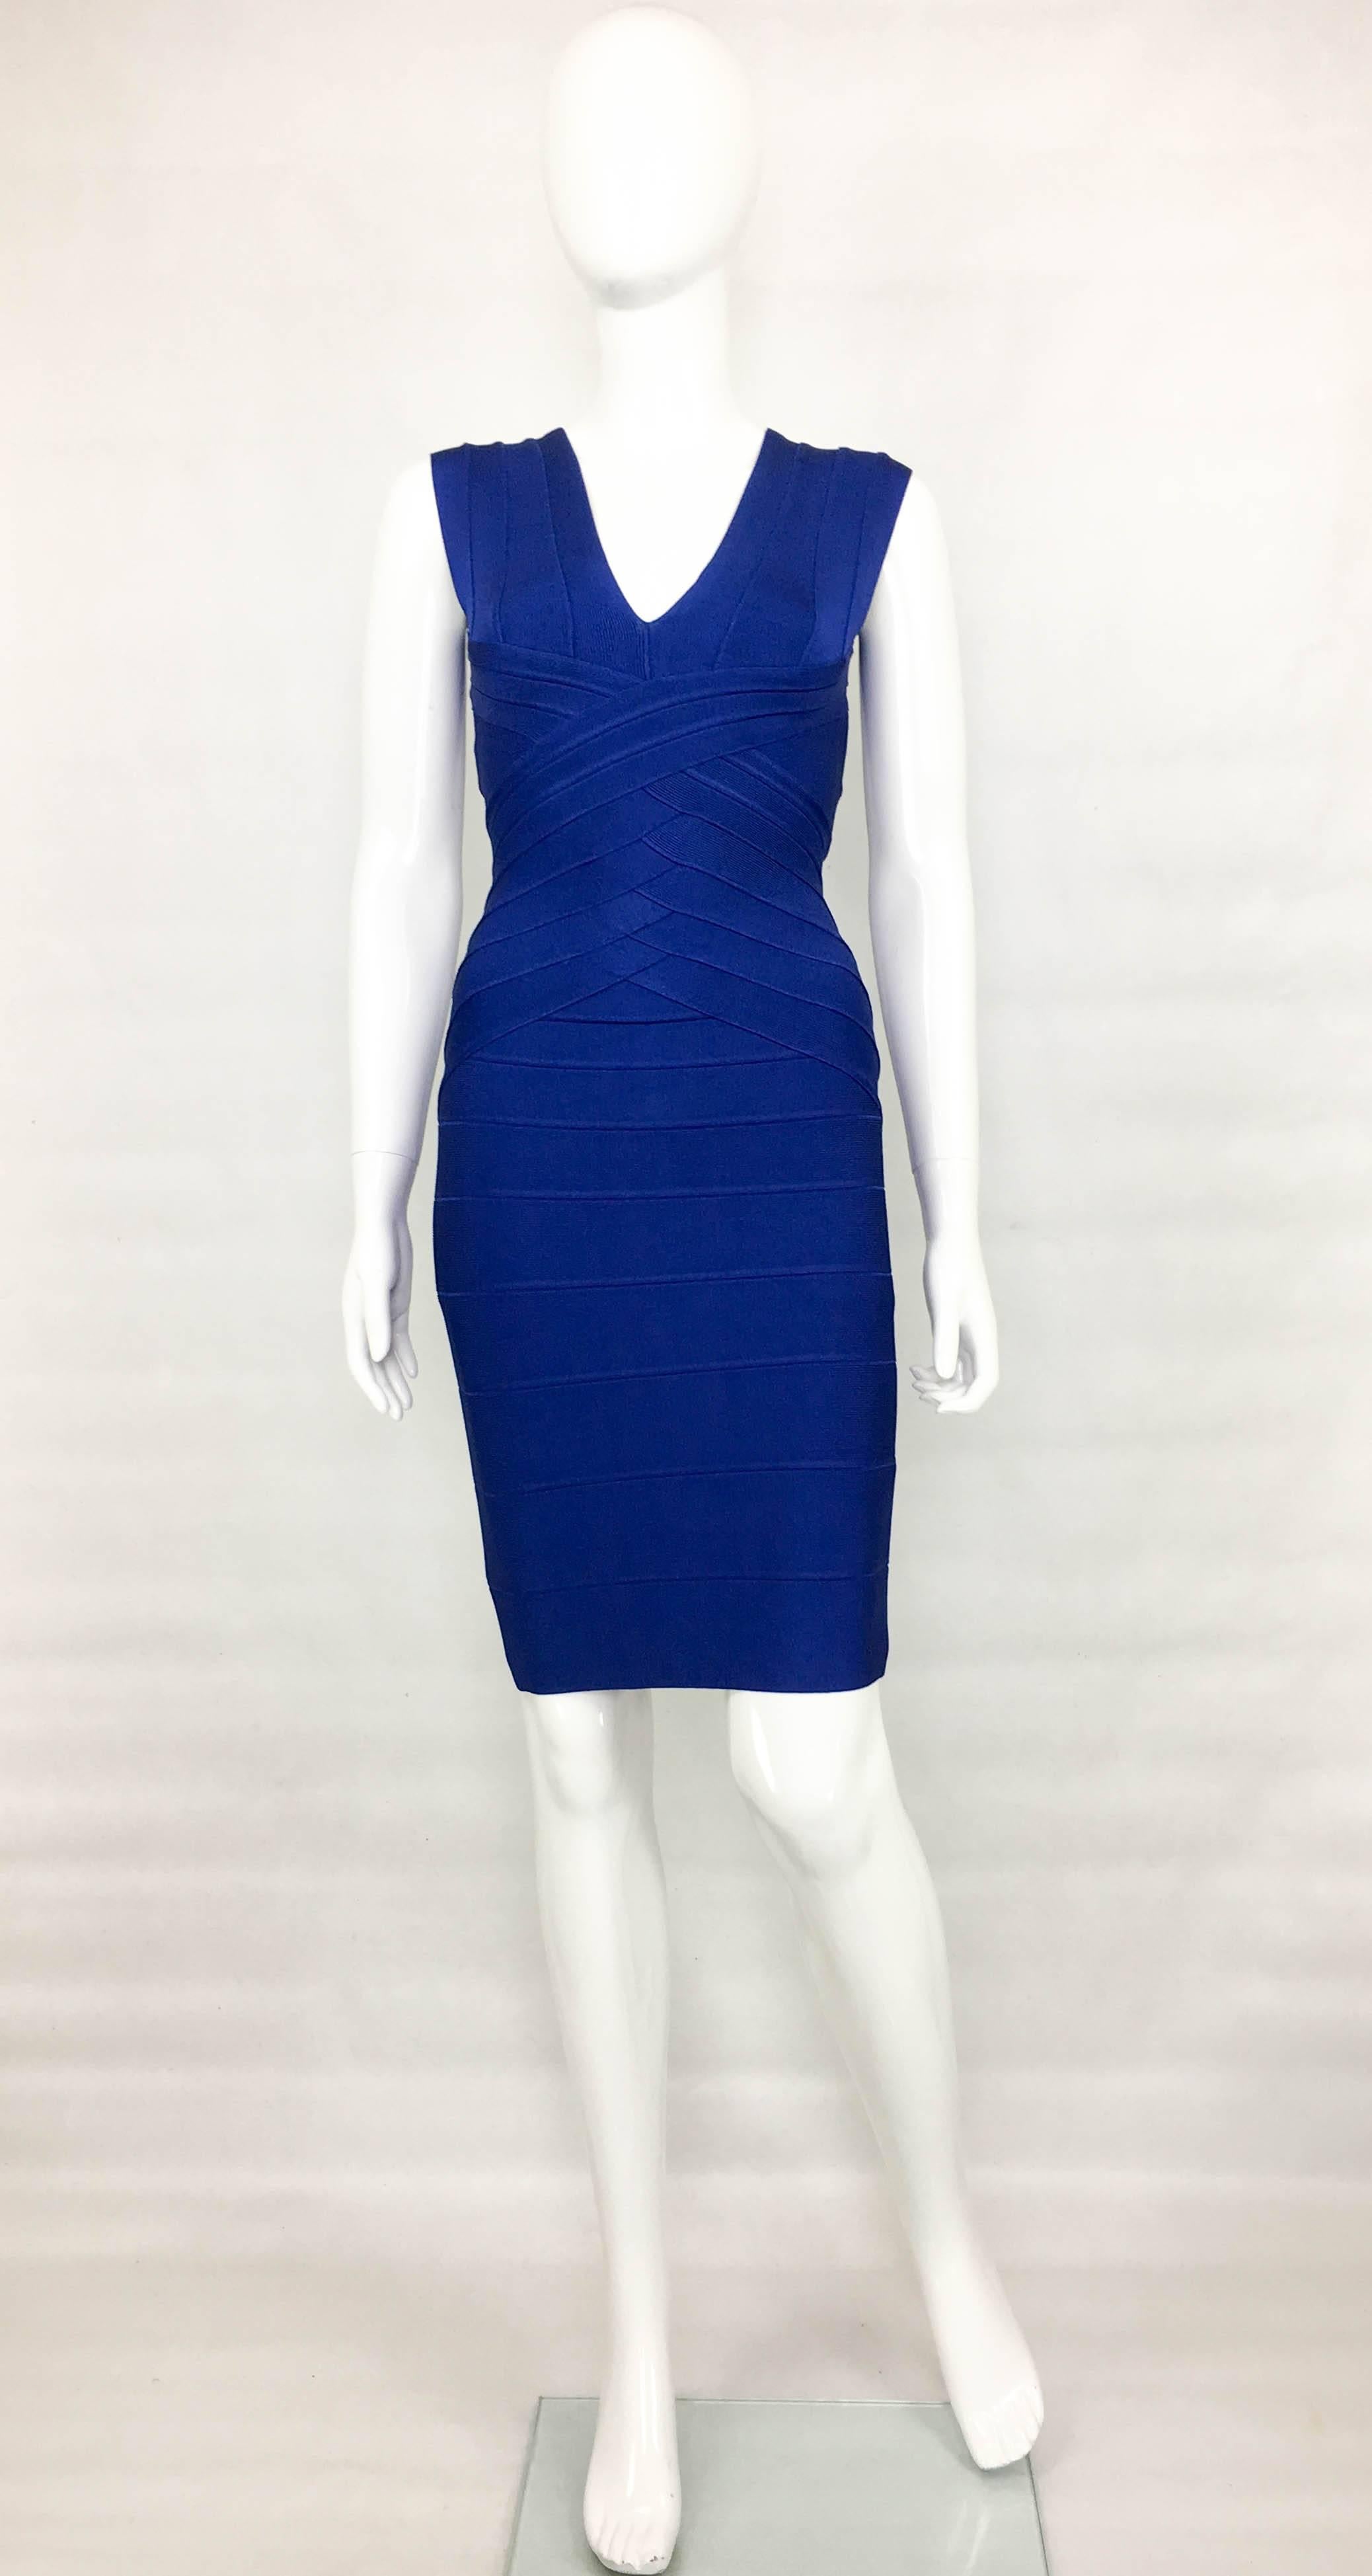 Herve Leger Royal Blue Bandage Dress. Made in stretchy jersey, this is the perfect dress for to steal the spotlight. This tight, bandage design contours the body well creating a very flattering silhouette. Sleeveless, the closure is by a hidden